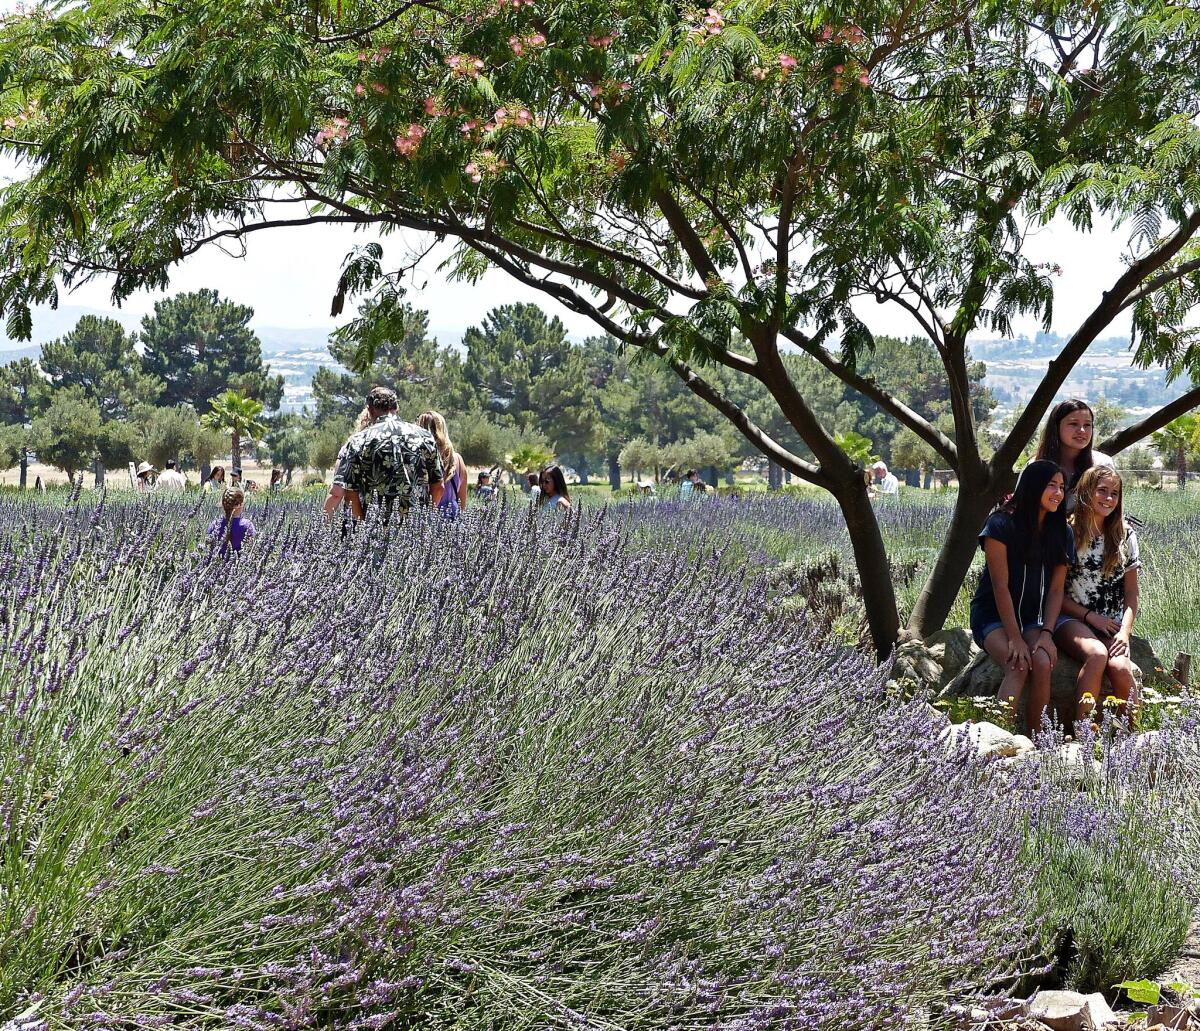 Strolling the grounds and snapping colorful photos are a top draw for attendees at the annual Lavender Festival at Highland Springs Ranch & Inn near Beaumont, Calif.